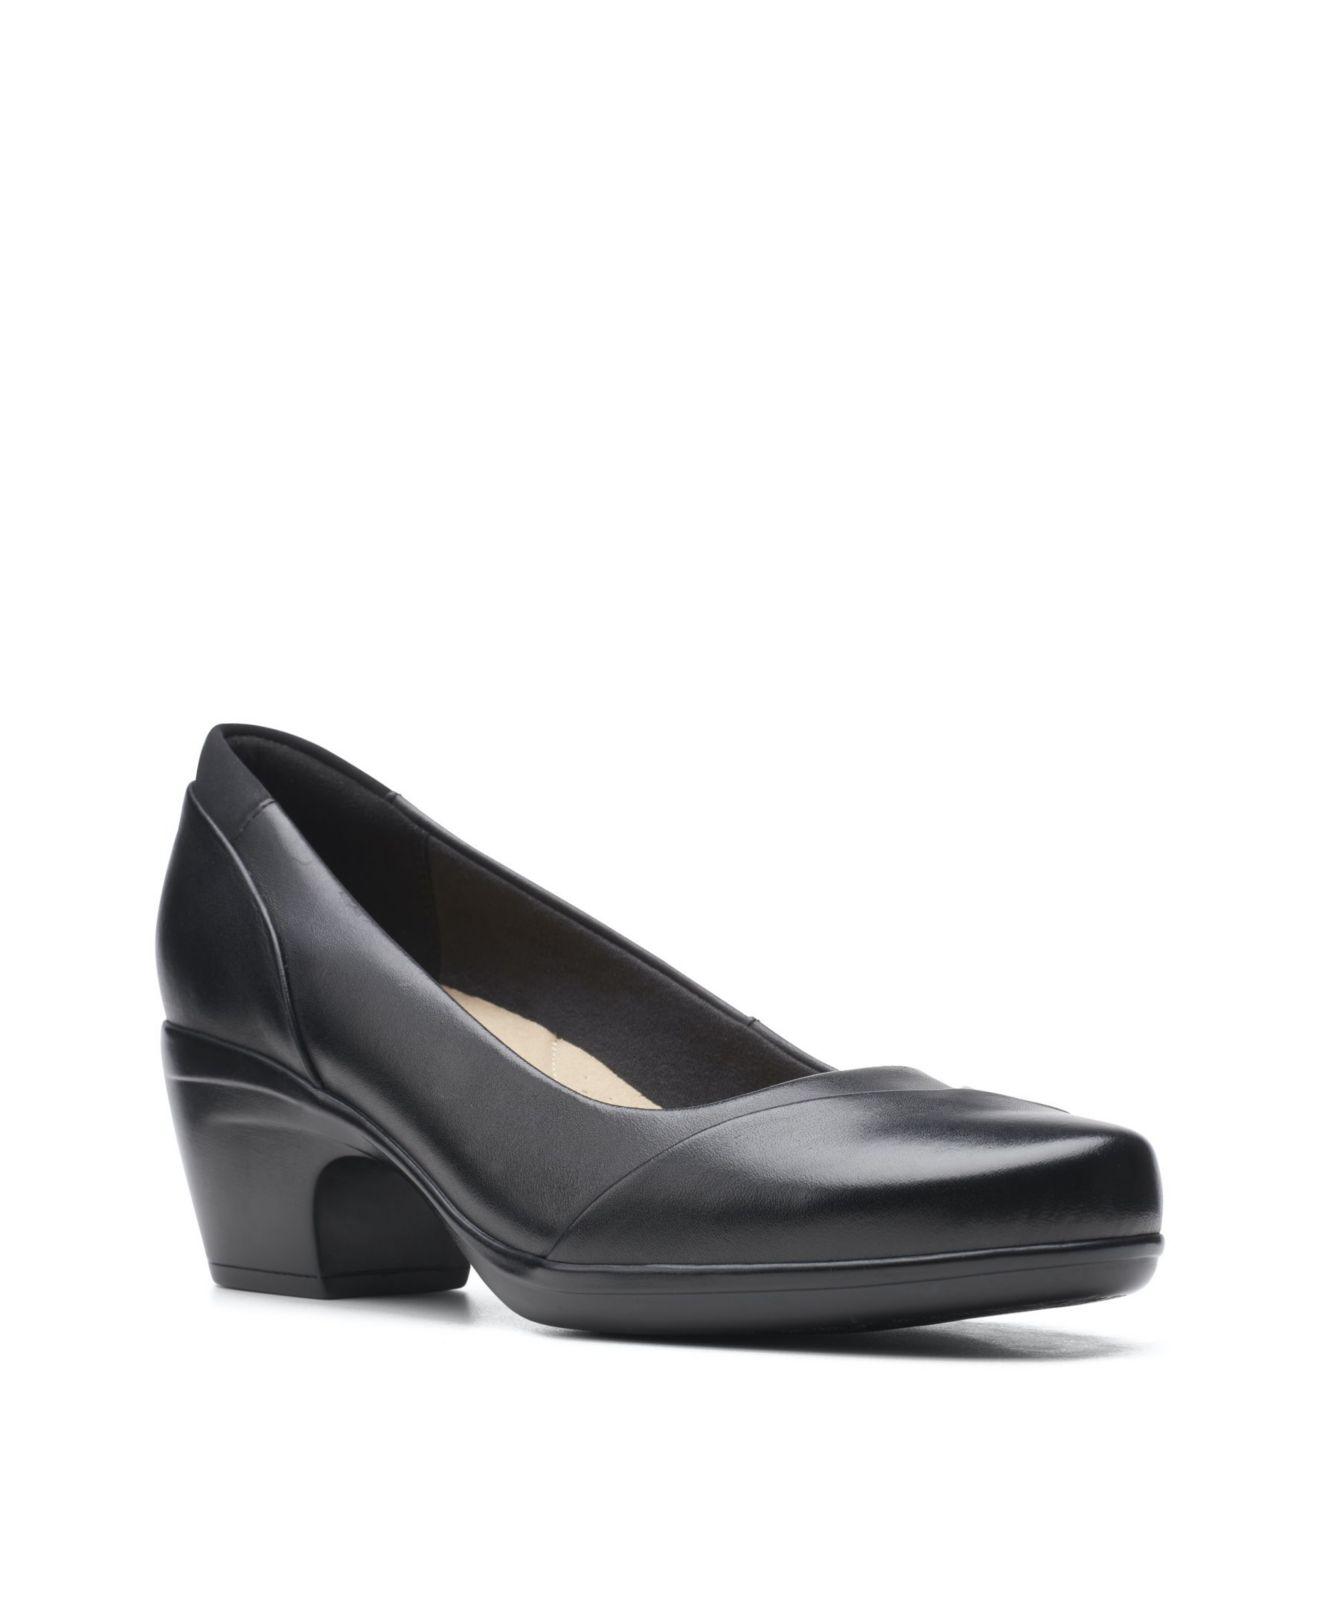 Clarks Cloudsteppers Emily Alexa Shoes in Black | Lyst